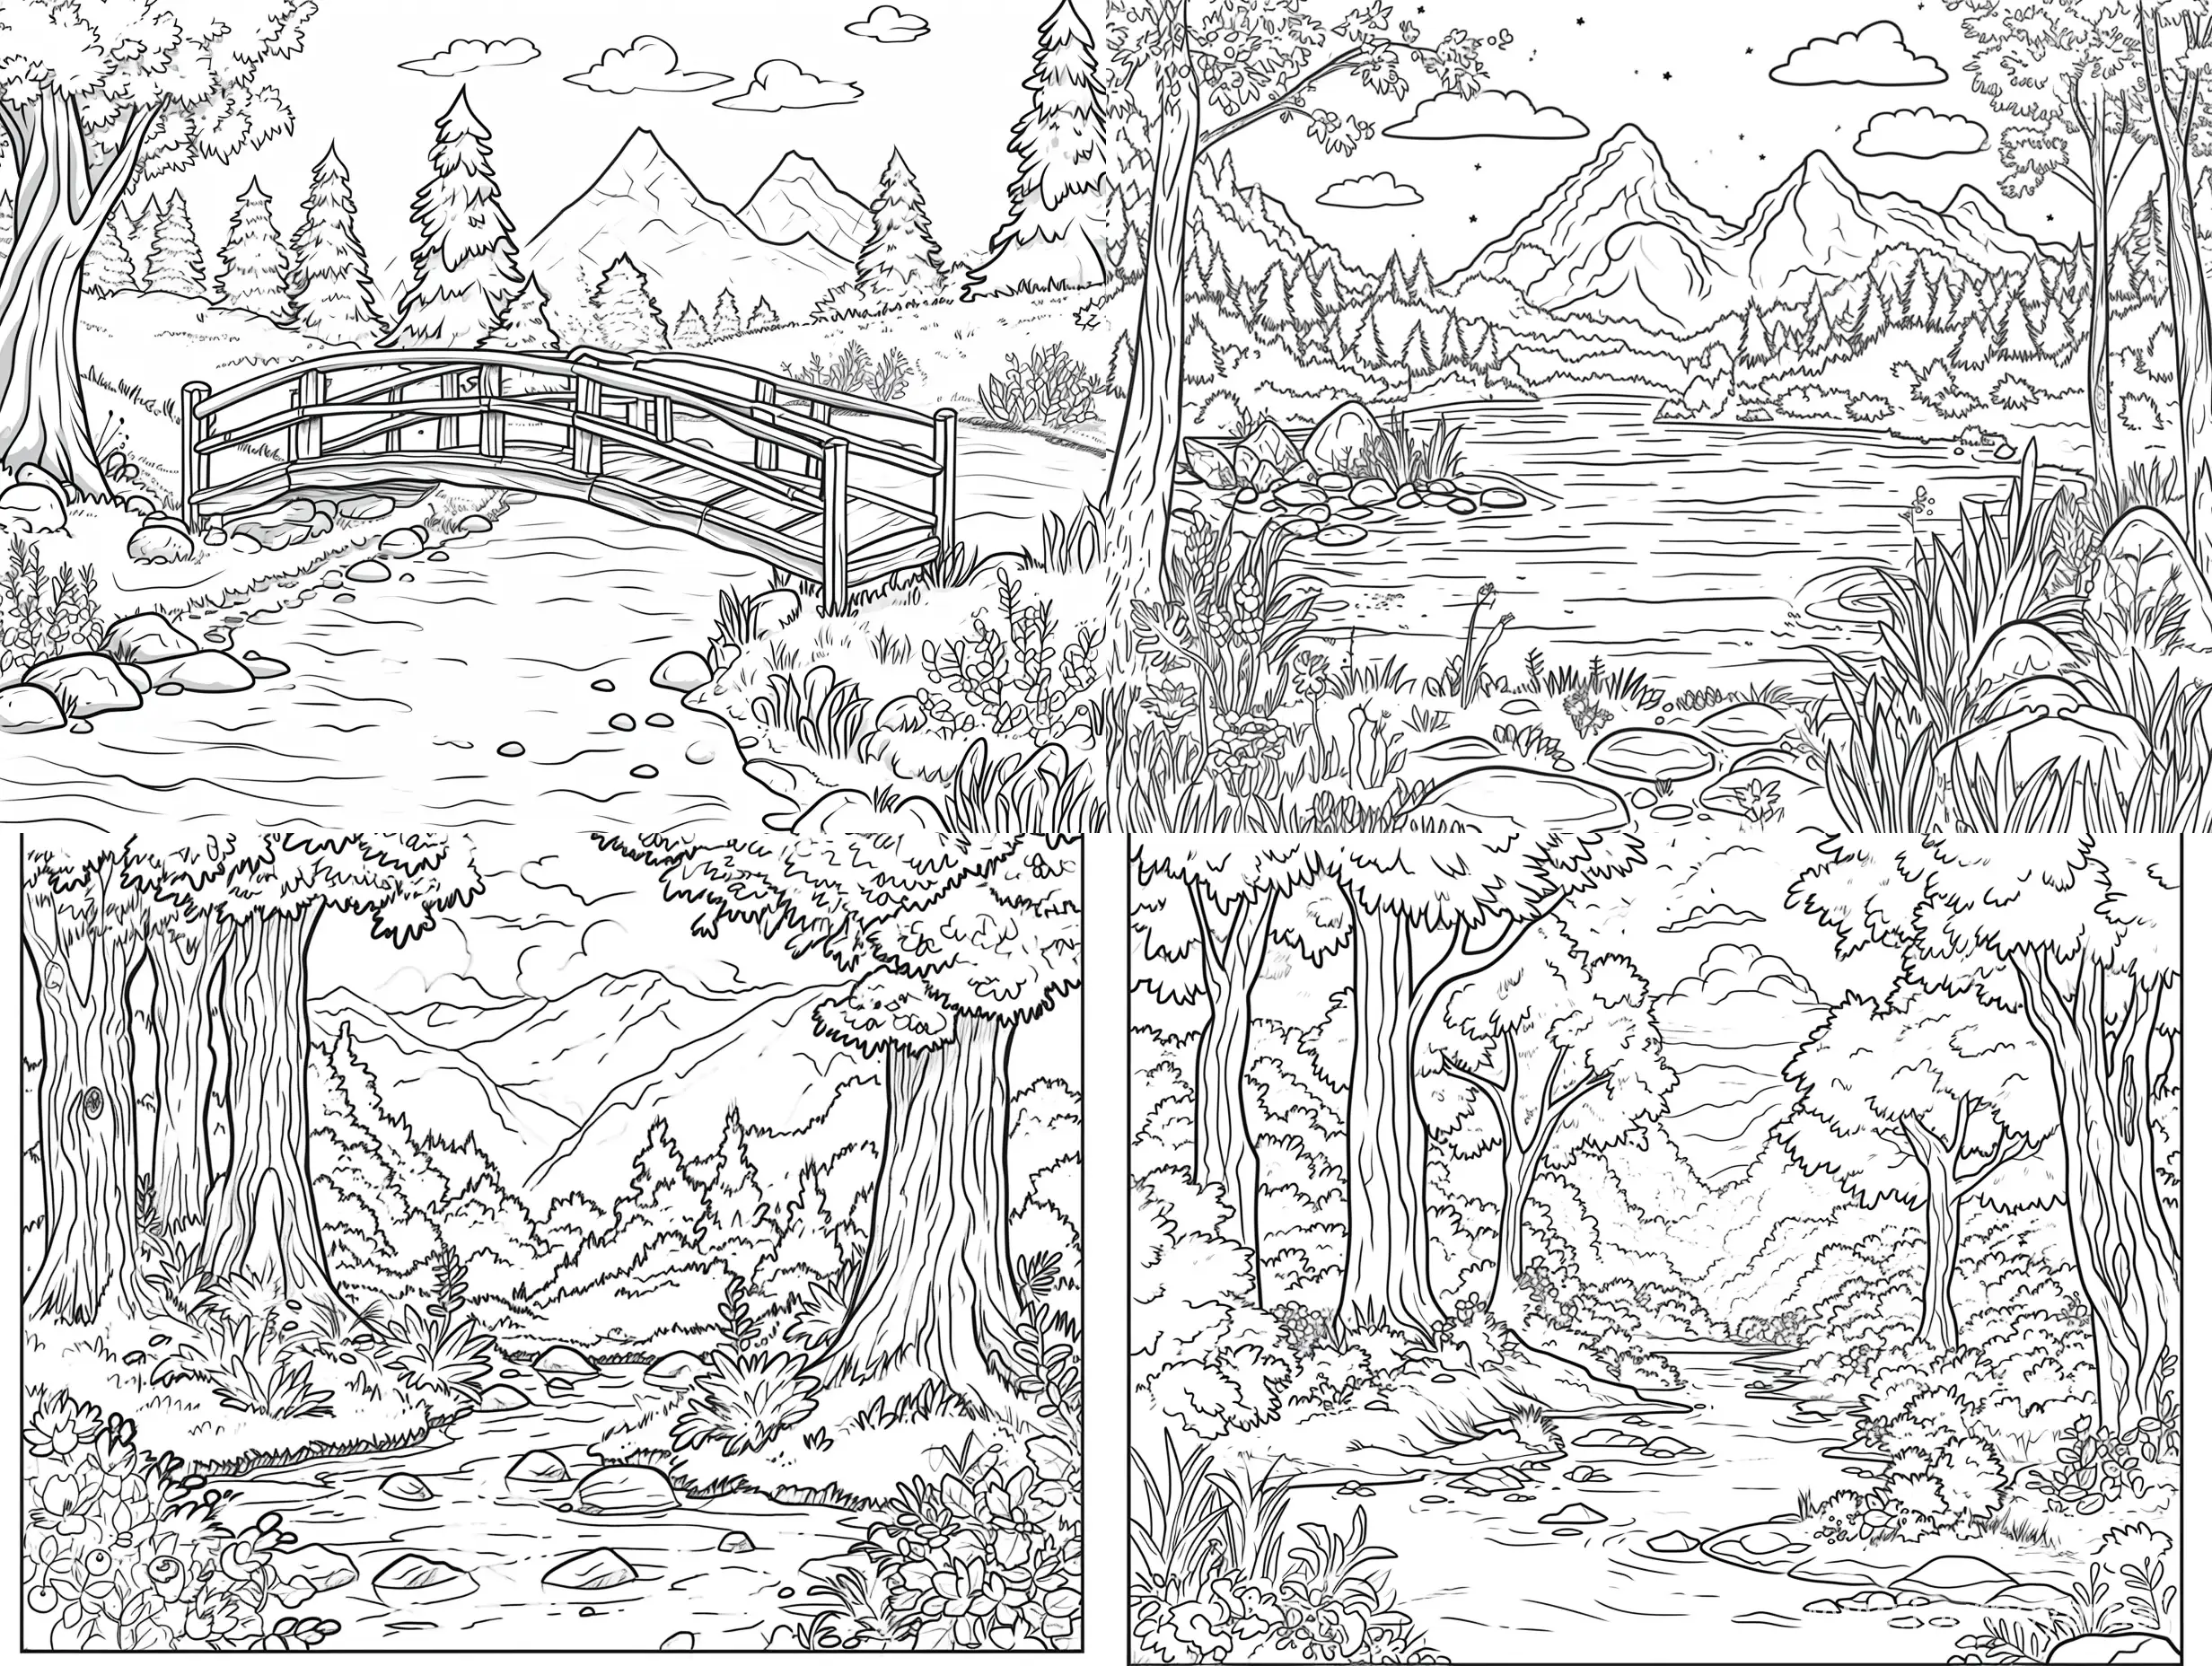 coloring page for kids, detailed, simply cartoon style, isolated, natural landscape